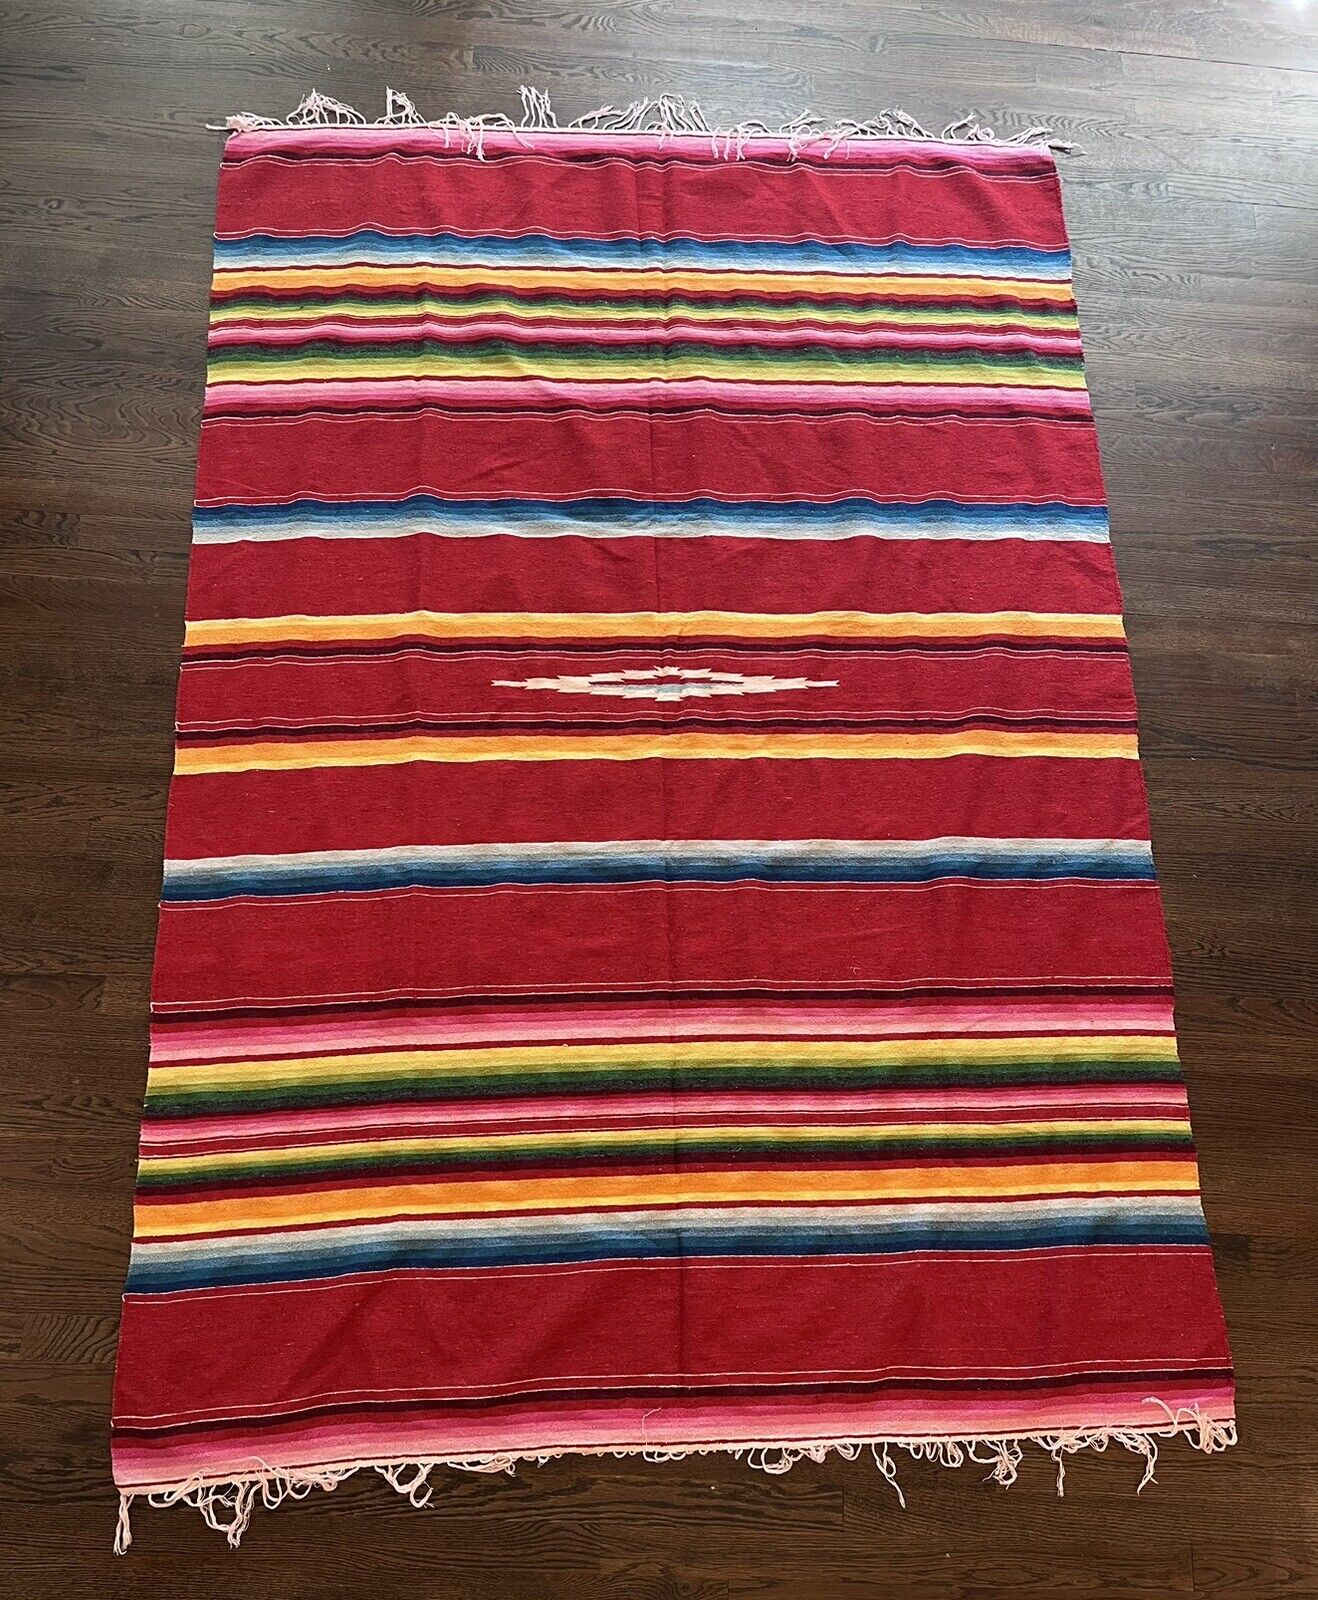 Large Vintage Handwoven Mexican Saltillo Sarape Multicolored Woven Blanket Red